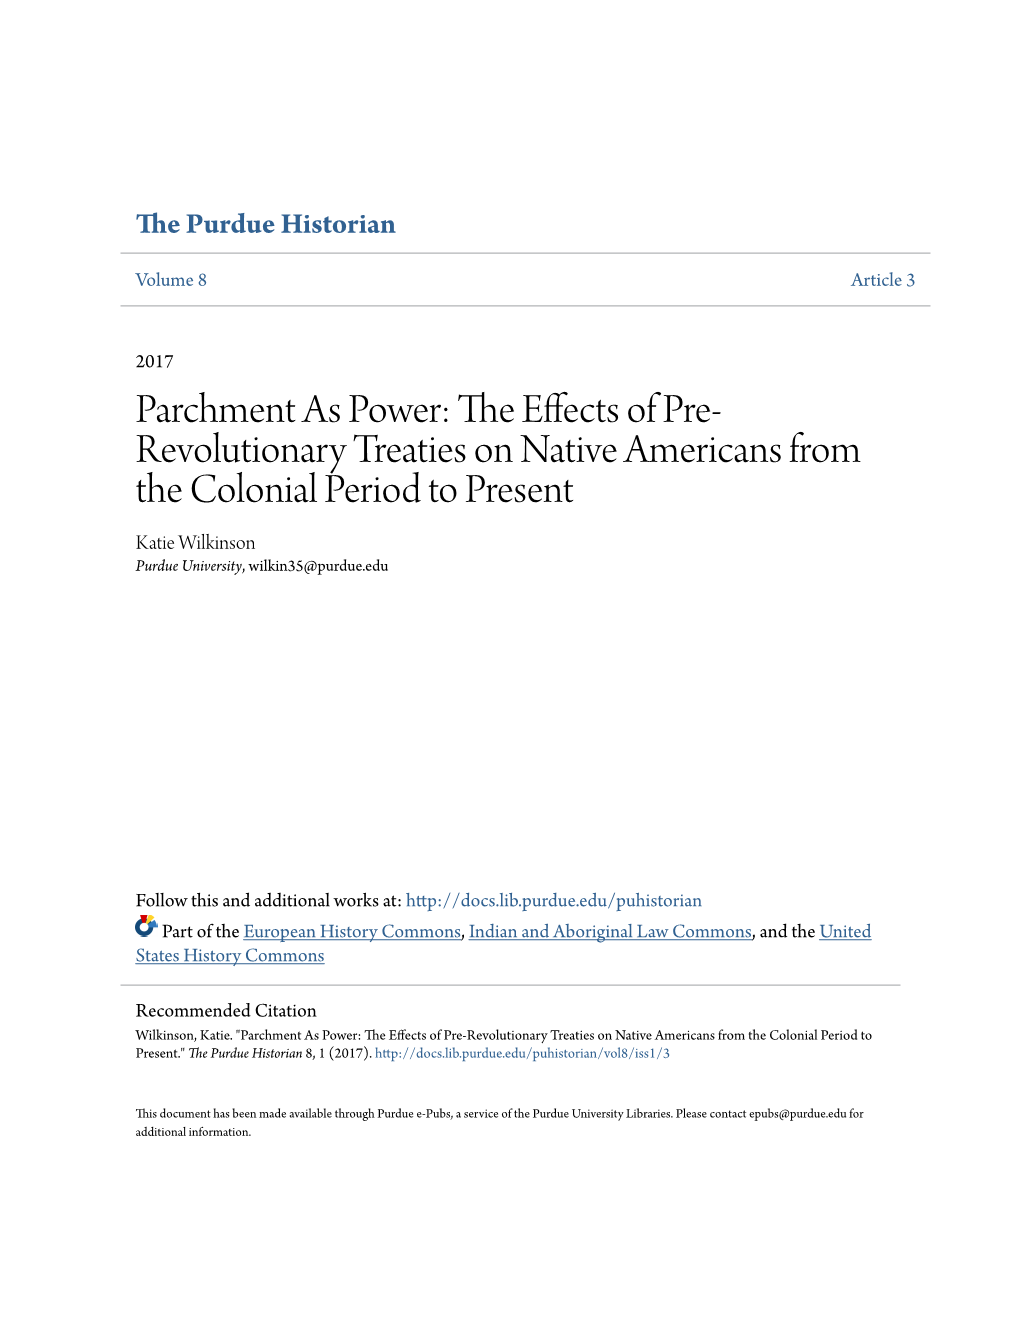 The Effects of Pre-Revolutionary Treaties on Native Americans from the Colonial Period to Present." the Purdue Historian 8, 1 (2017)